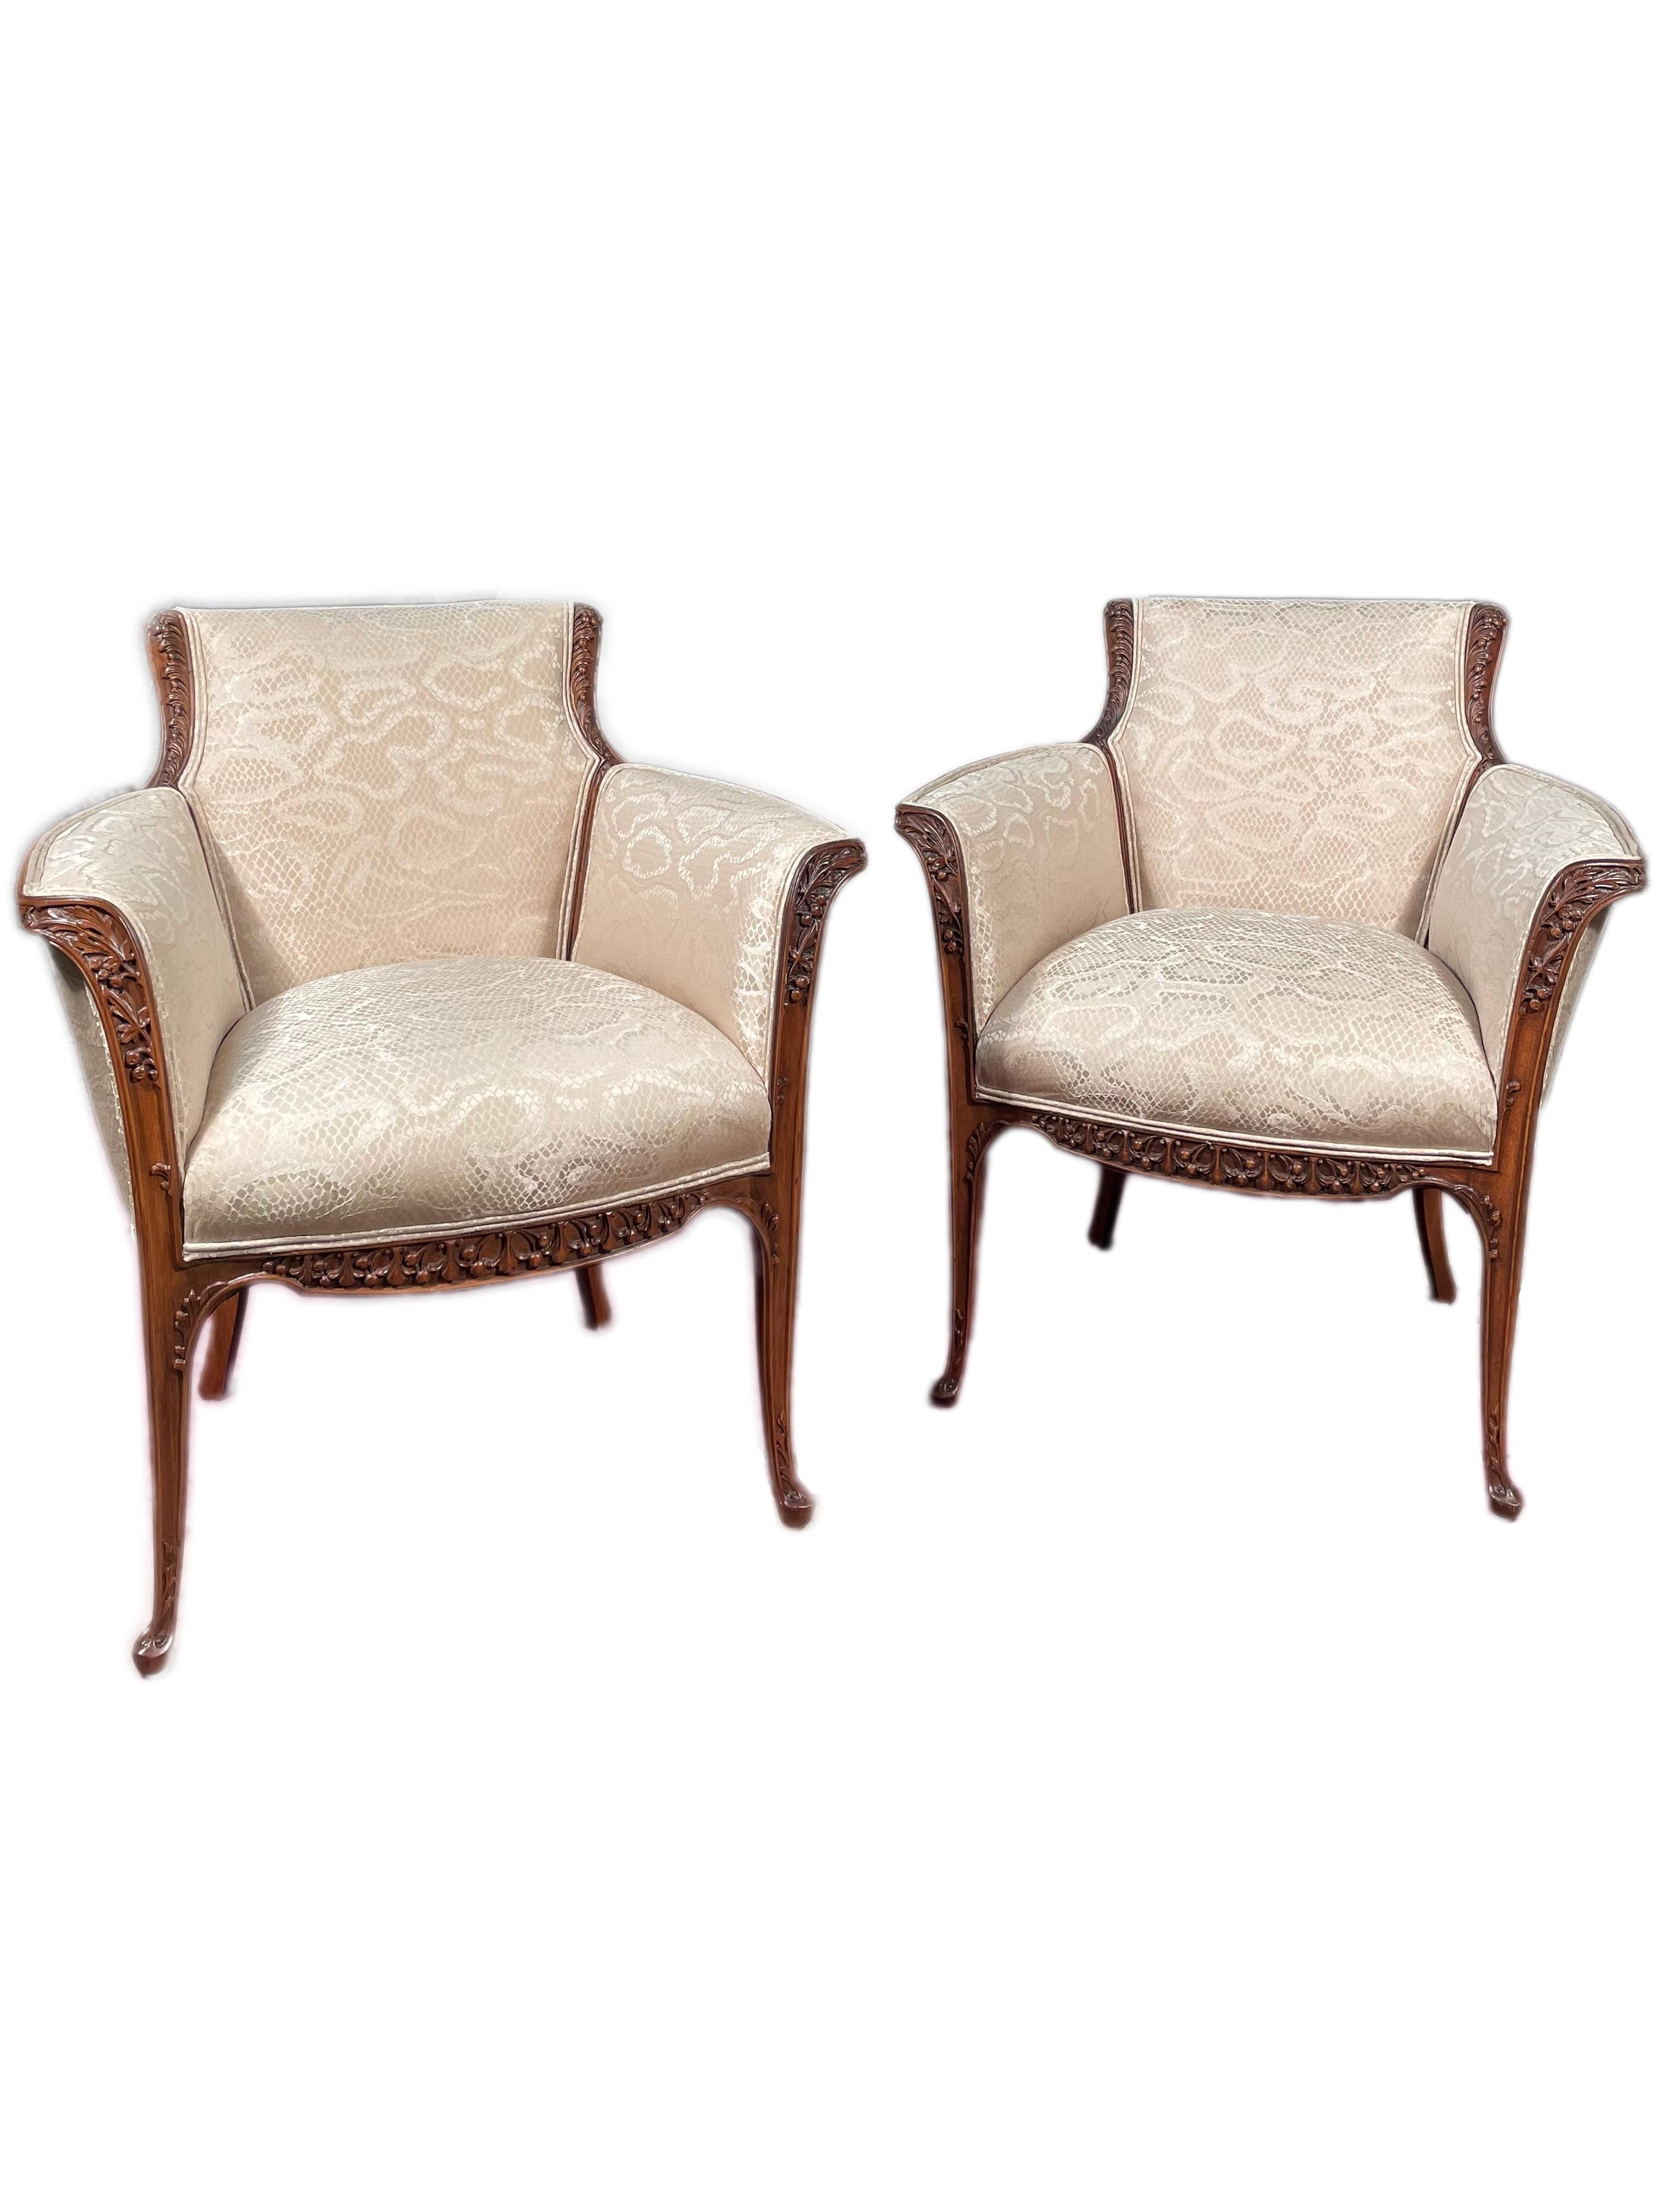 20th Century Pair of French Art Nouveau Armchairs by, Louis Majorelle Arm Chairs  For Sale